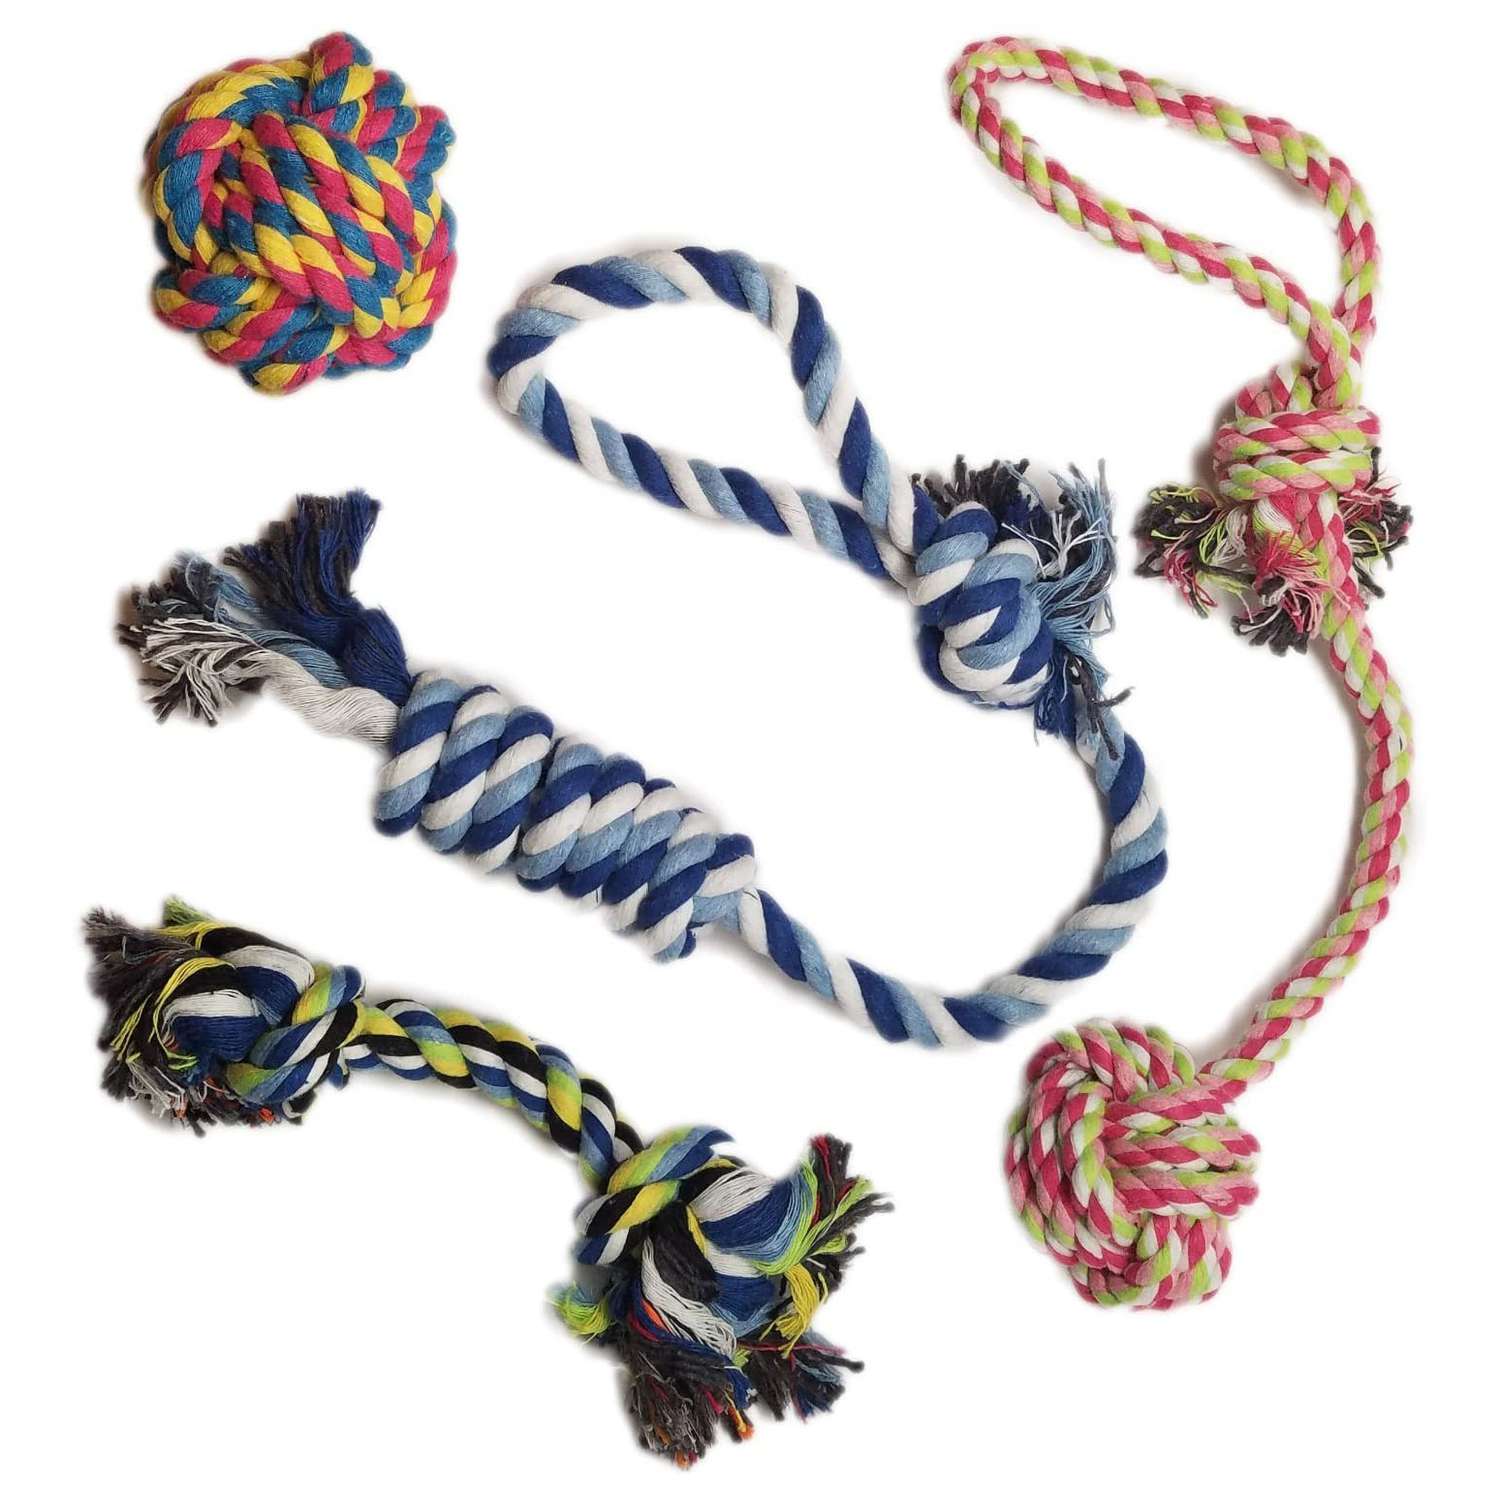 Tough Twisted Rope Toy with 5 Knots Dog Rope Toys for Aggressive Chewers Interactive Heavy Duty Dog Toys for Medium Large Dogs